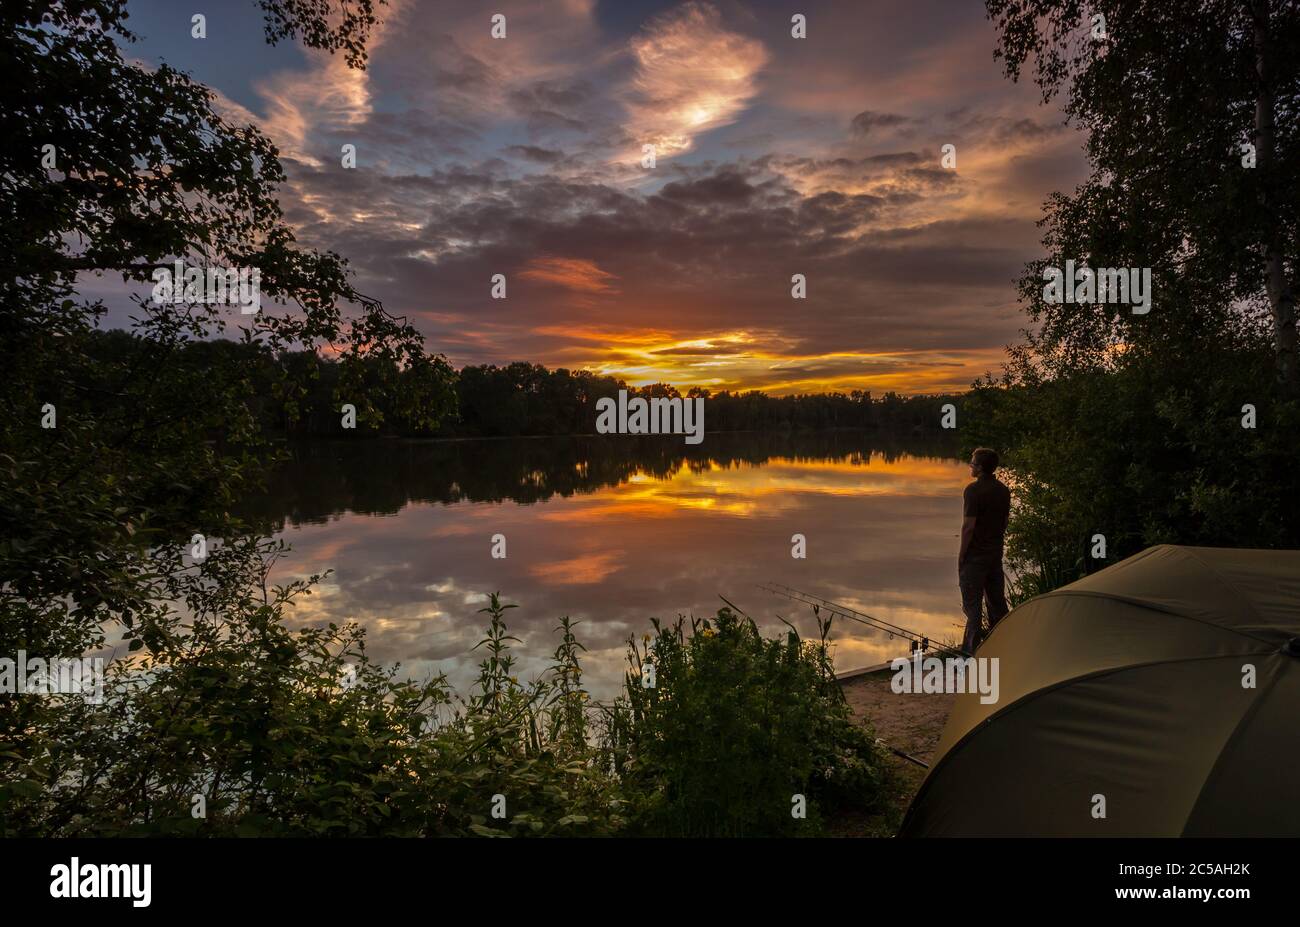 Angler stood next to fishing rods watching the sunset over a carp fishing lake. Warm golden colours in a summer sky Stock Photo